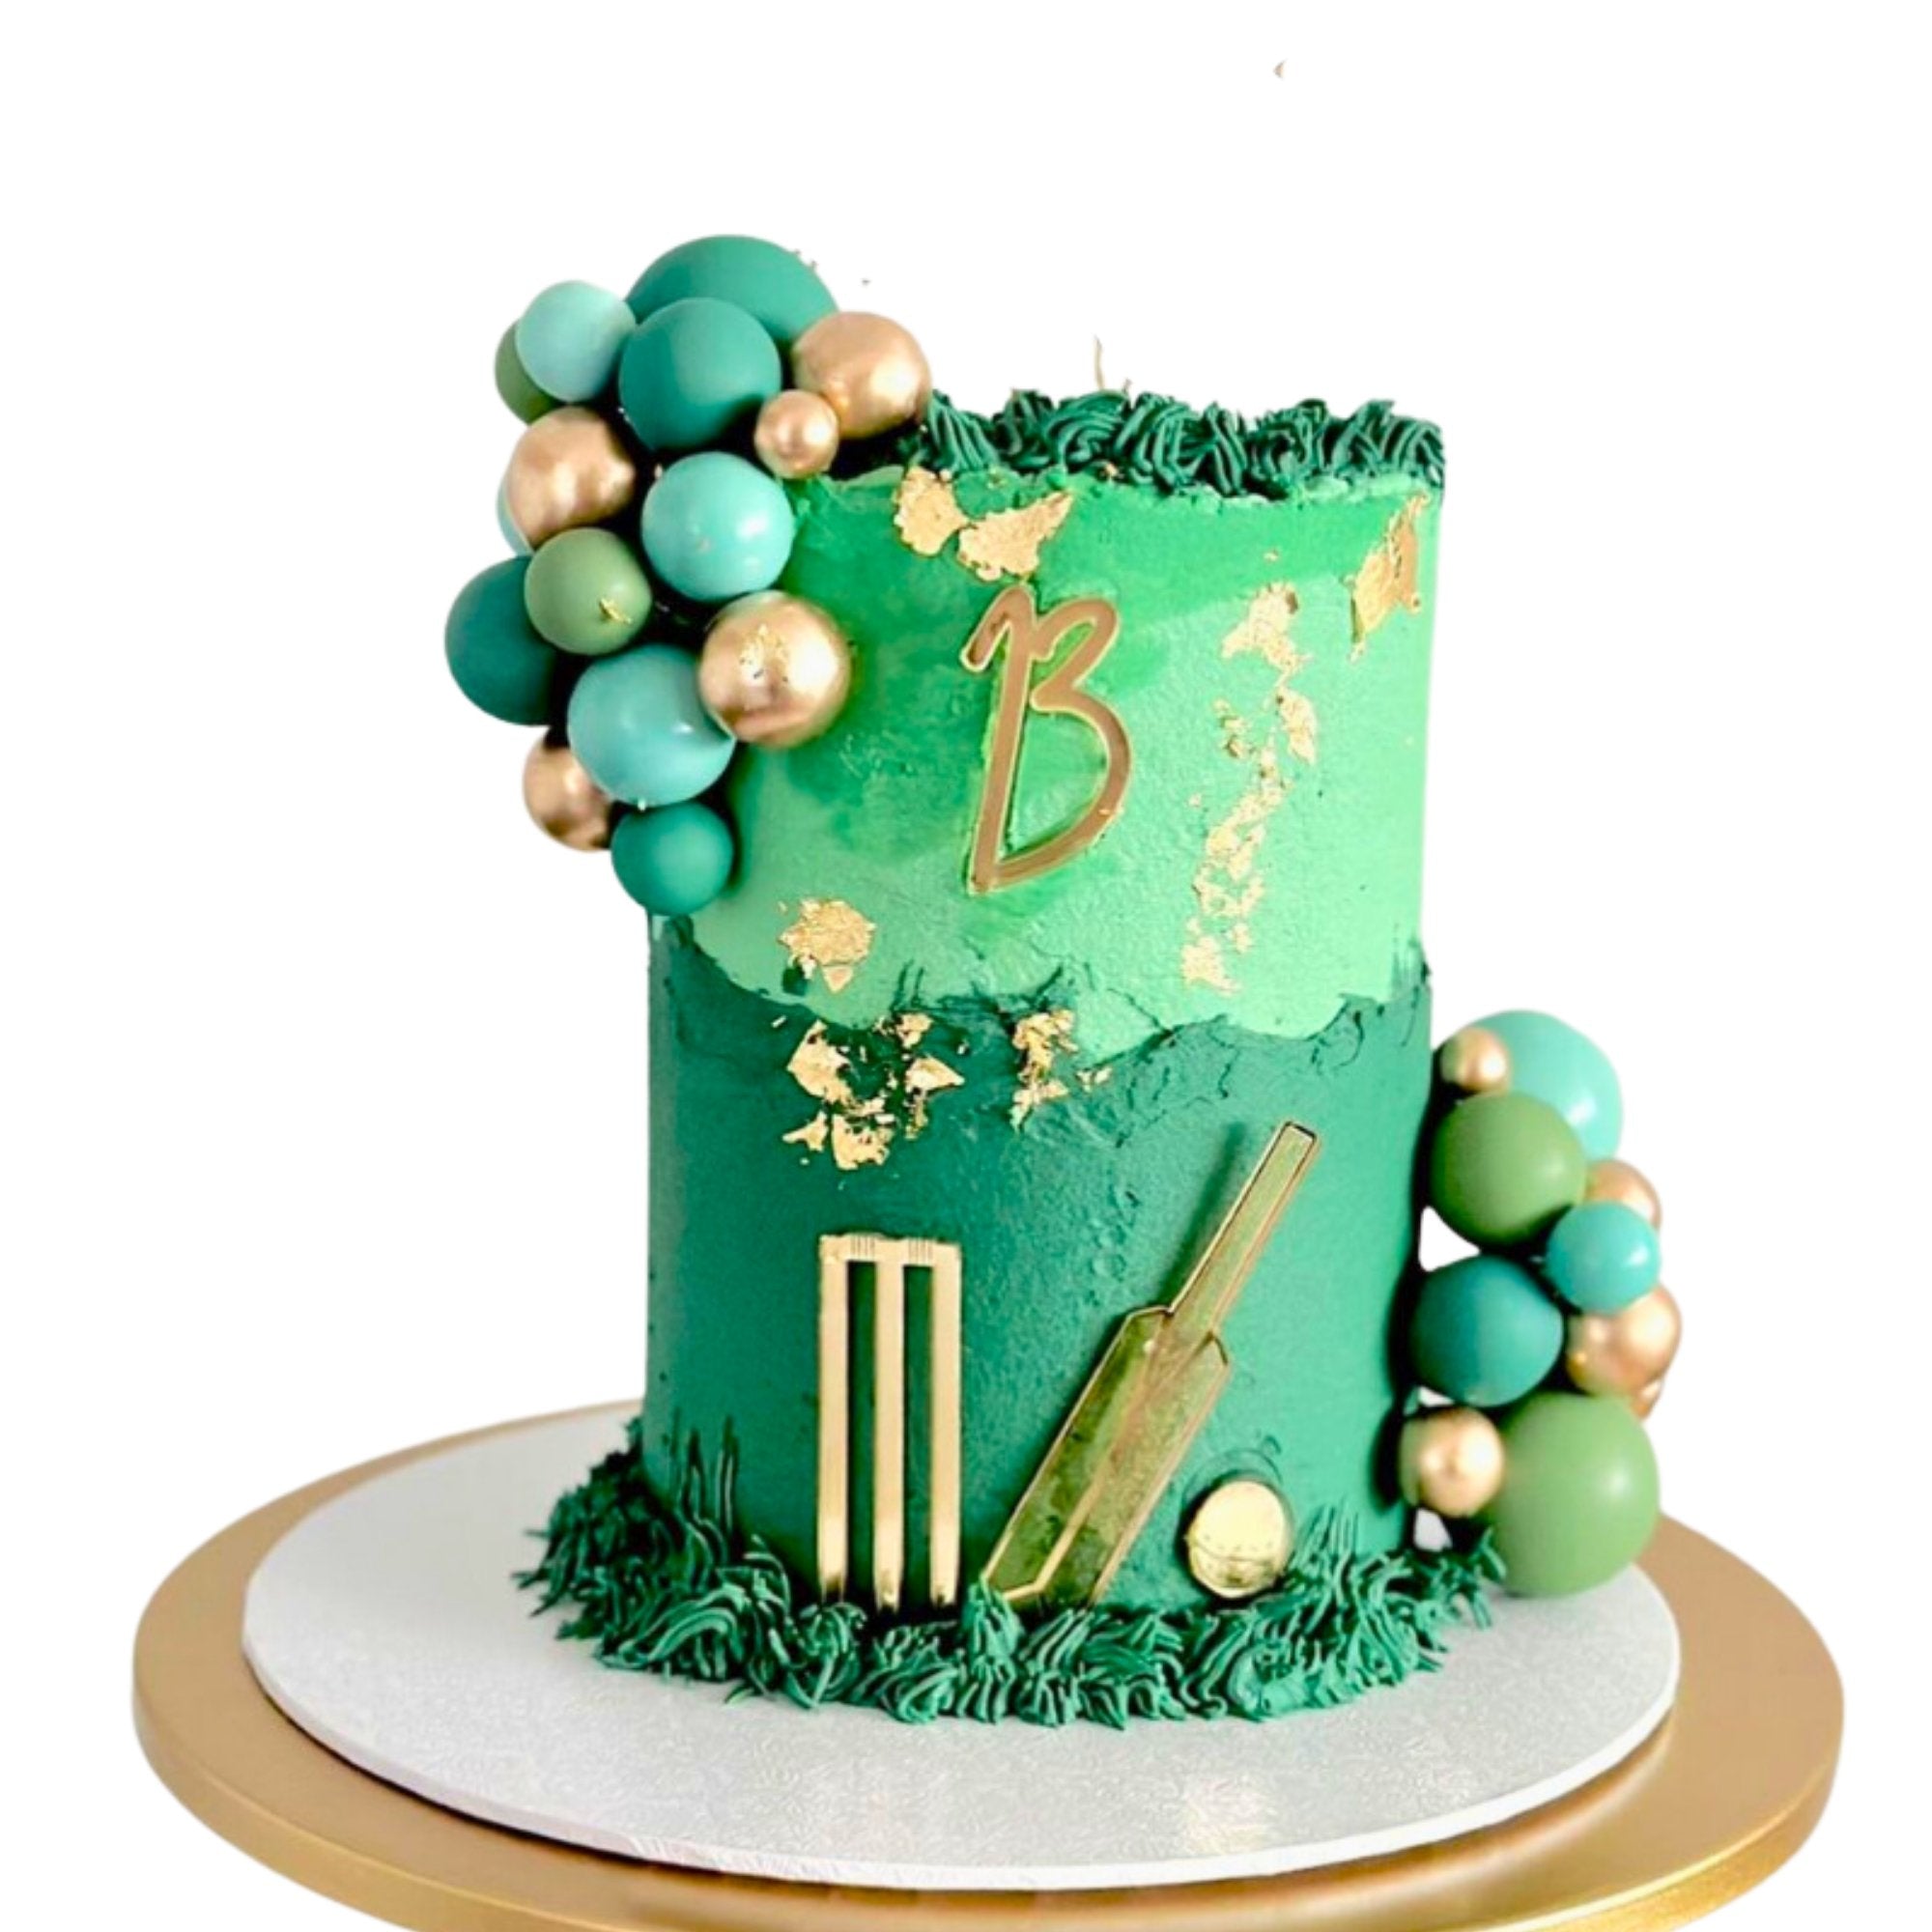 Plastic Cricket Cake Toppers - Set of 7 | Lollipop Cake Supplies